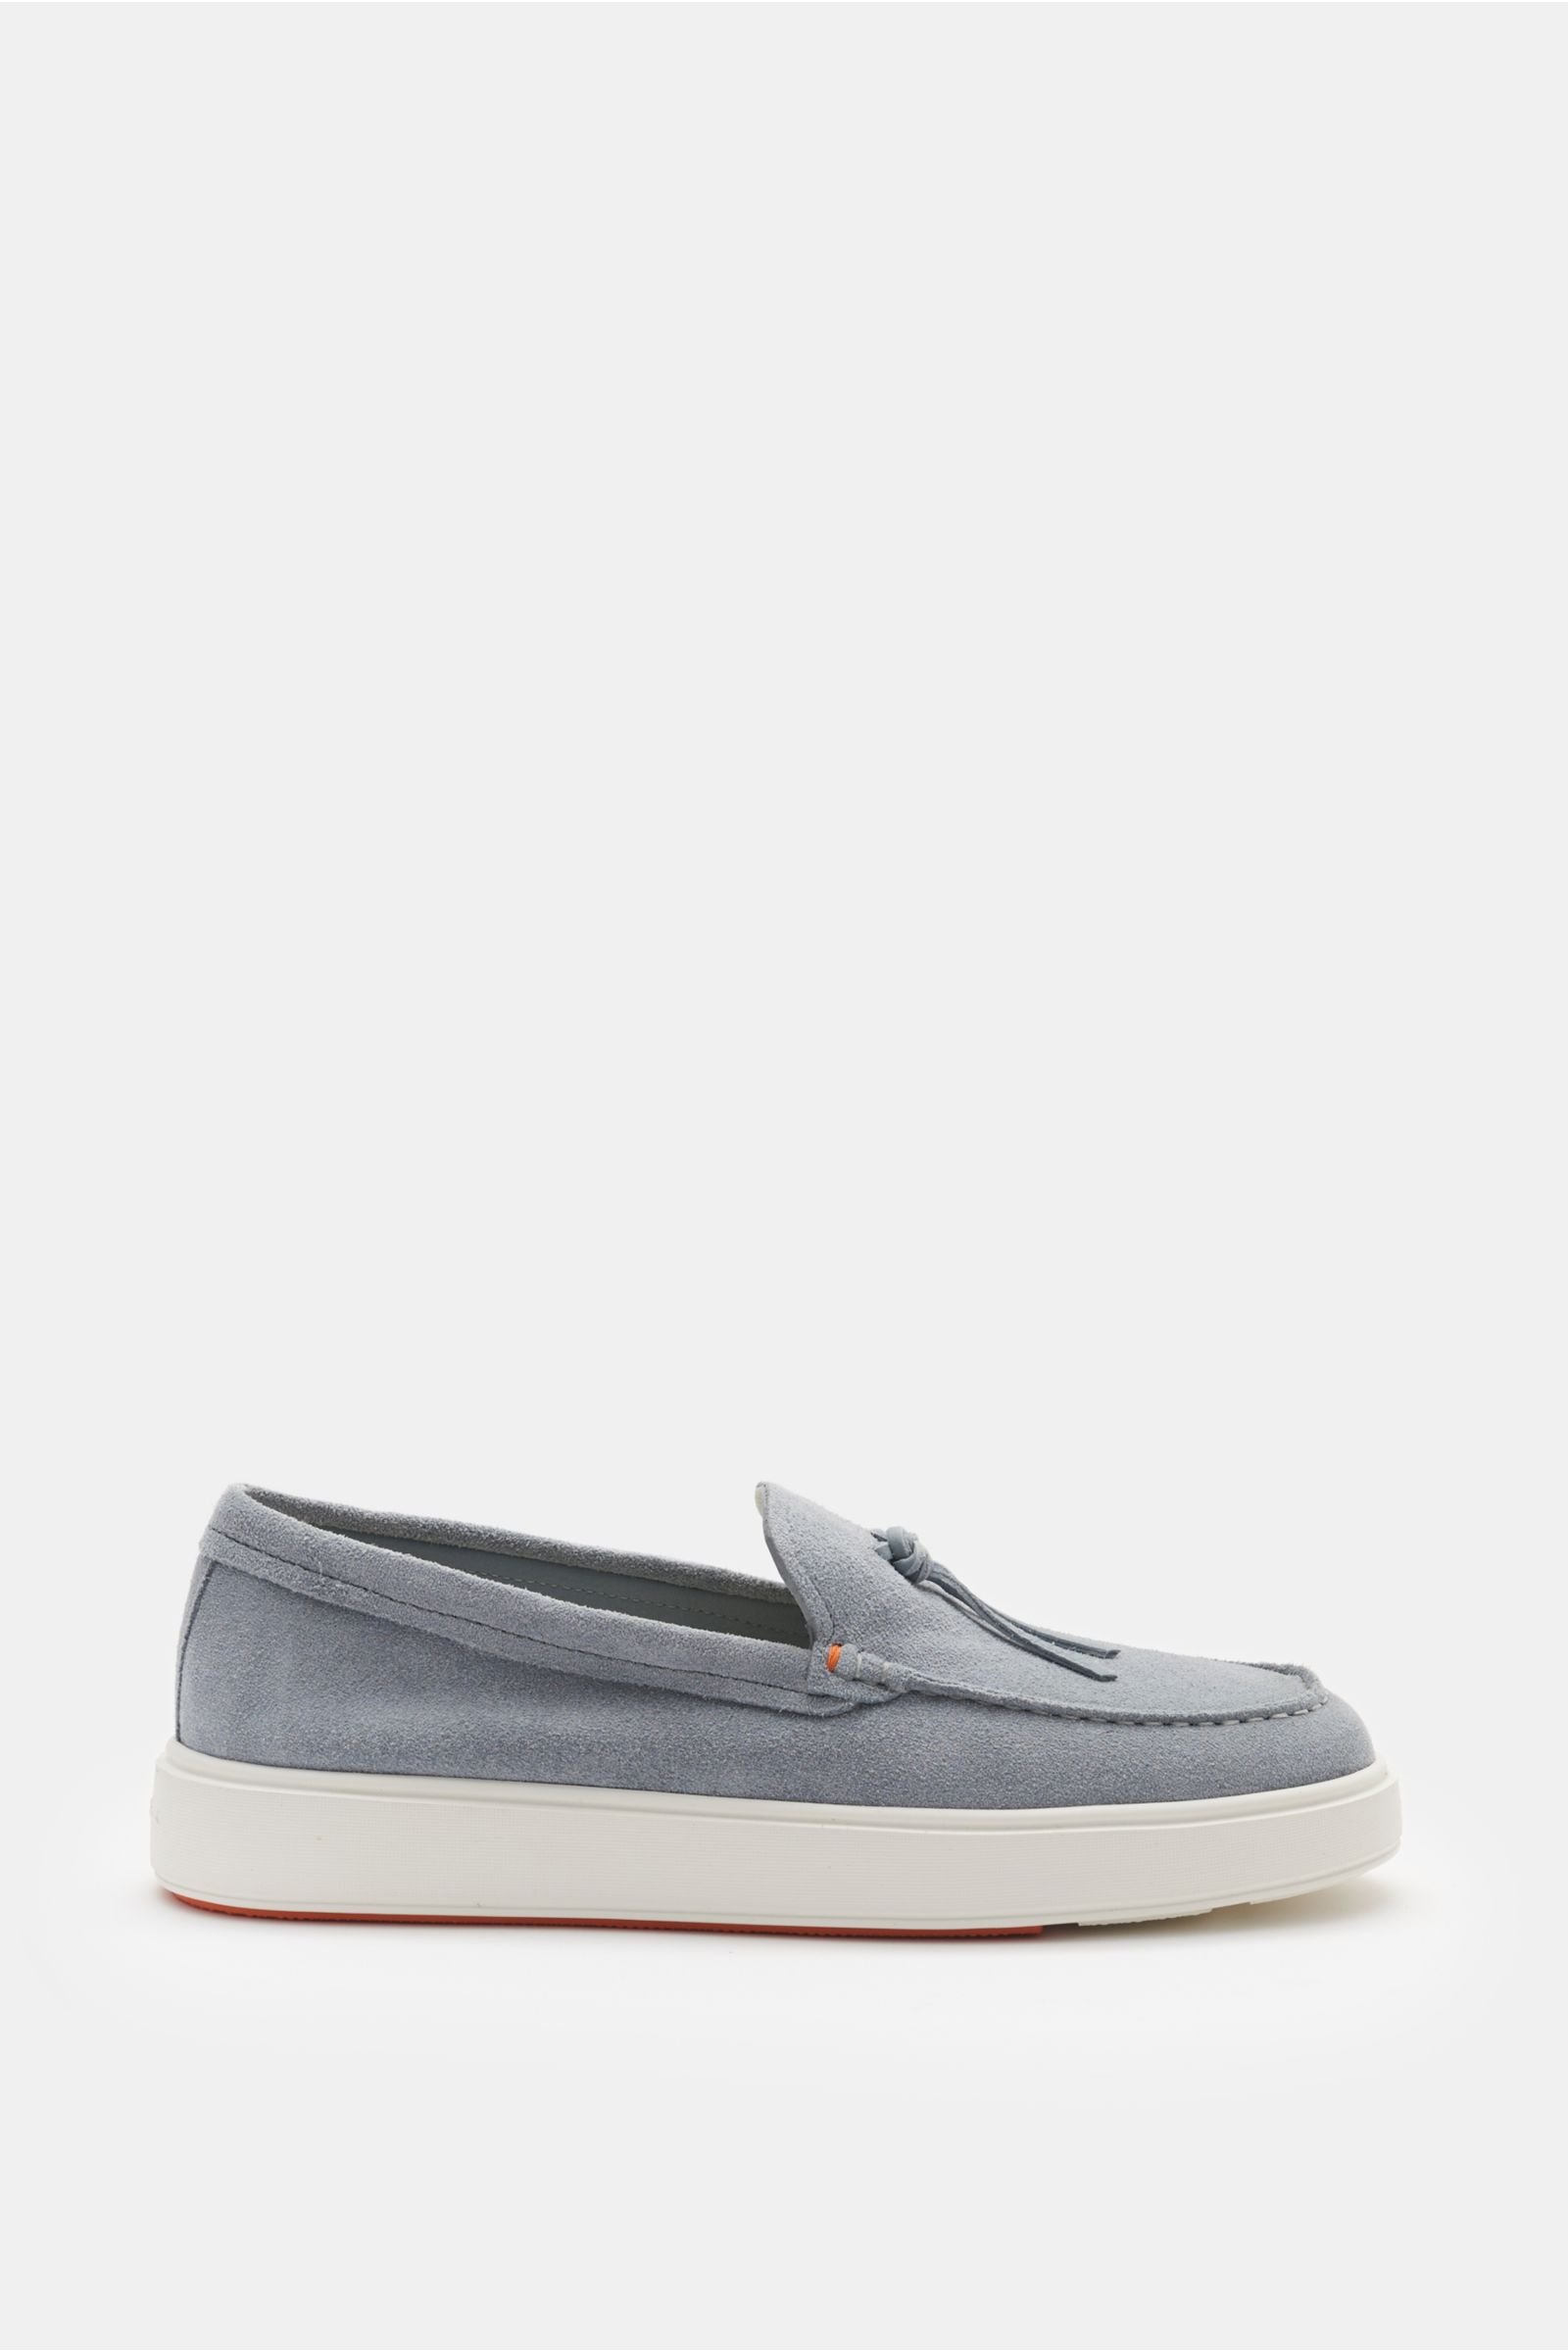 Loafers grey-blue